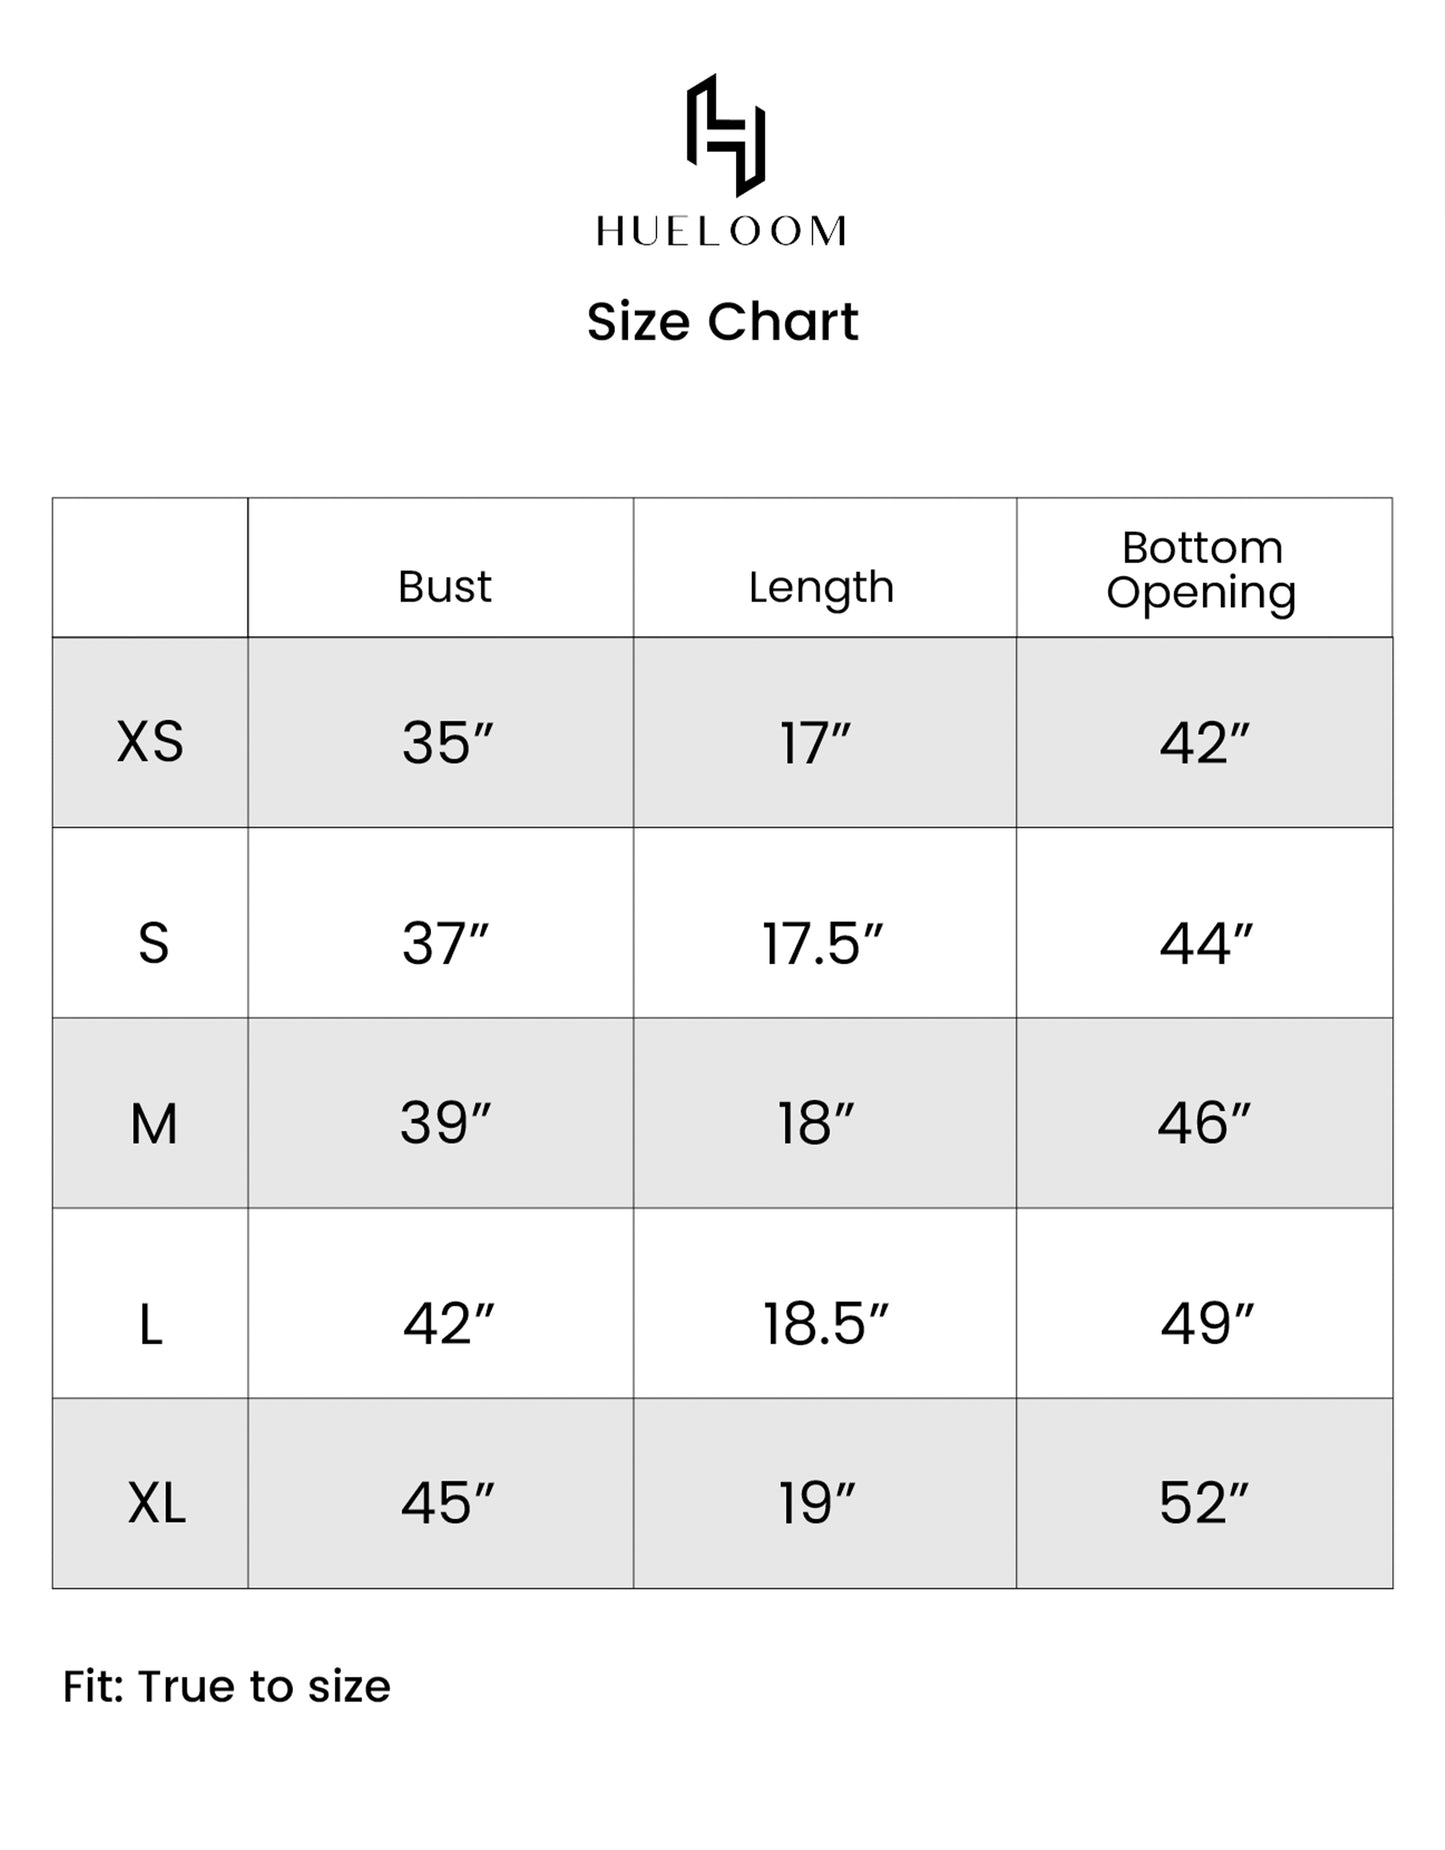 Hueloom's size chart guide for sizes XS, S, M, L, XL for reversible halter top